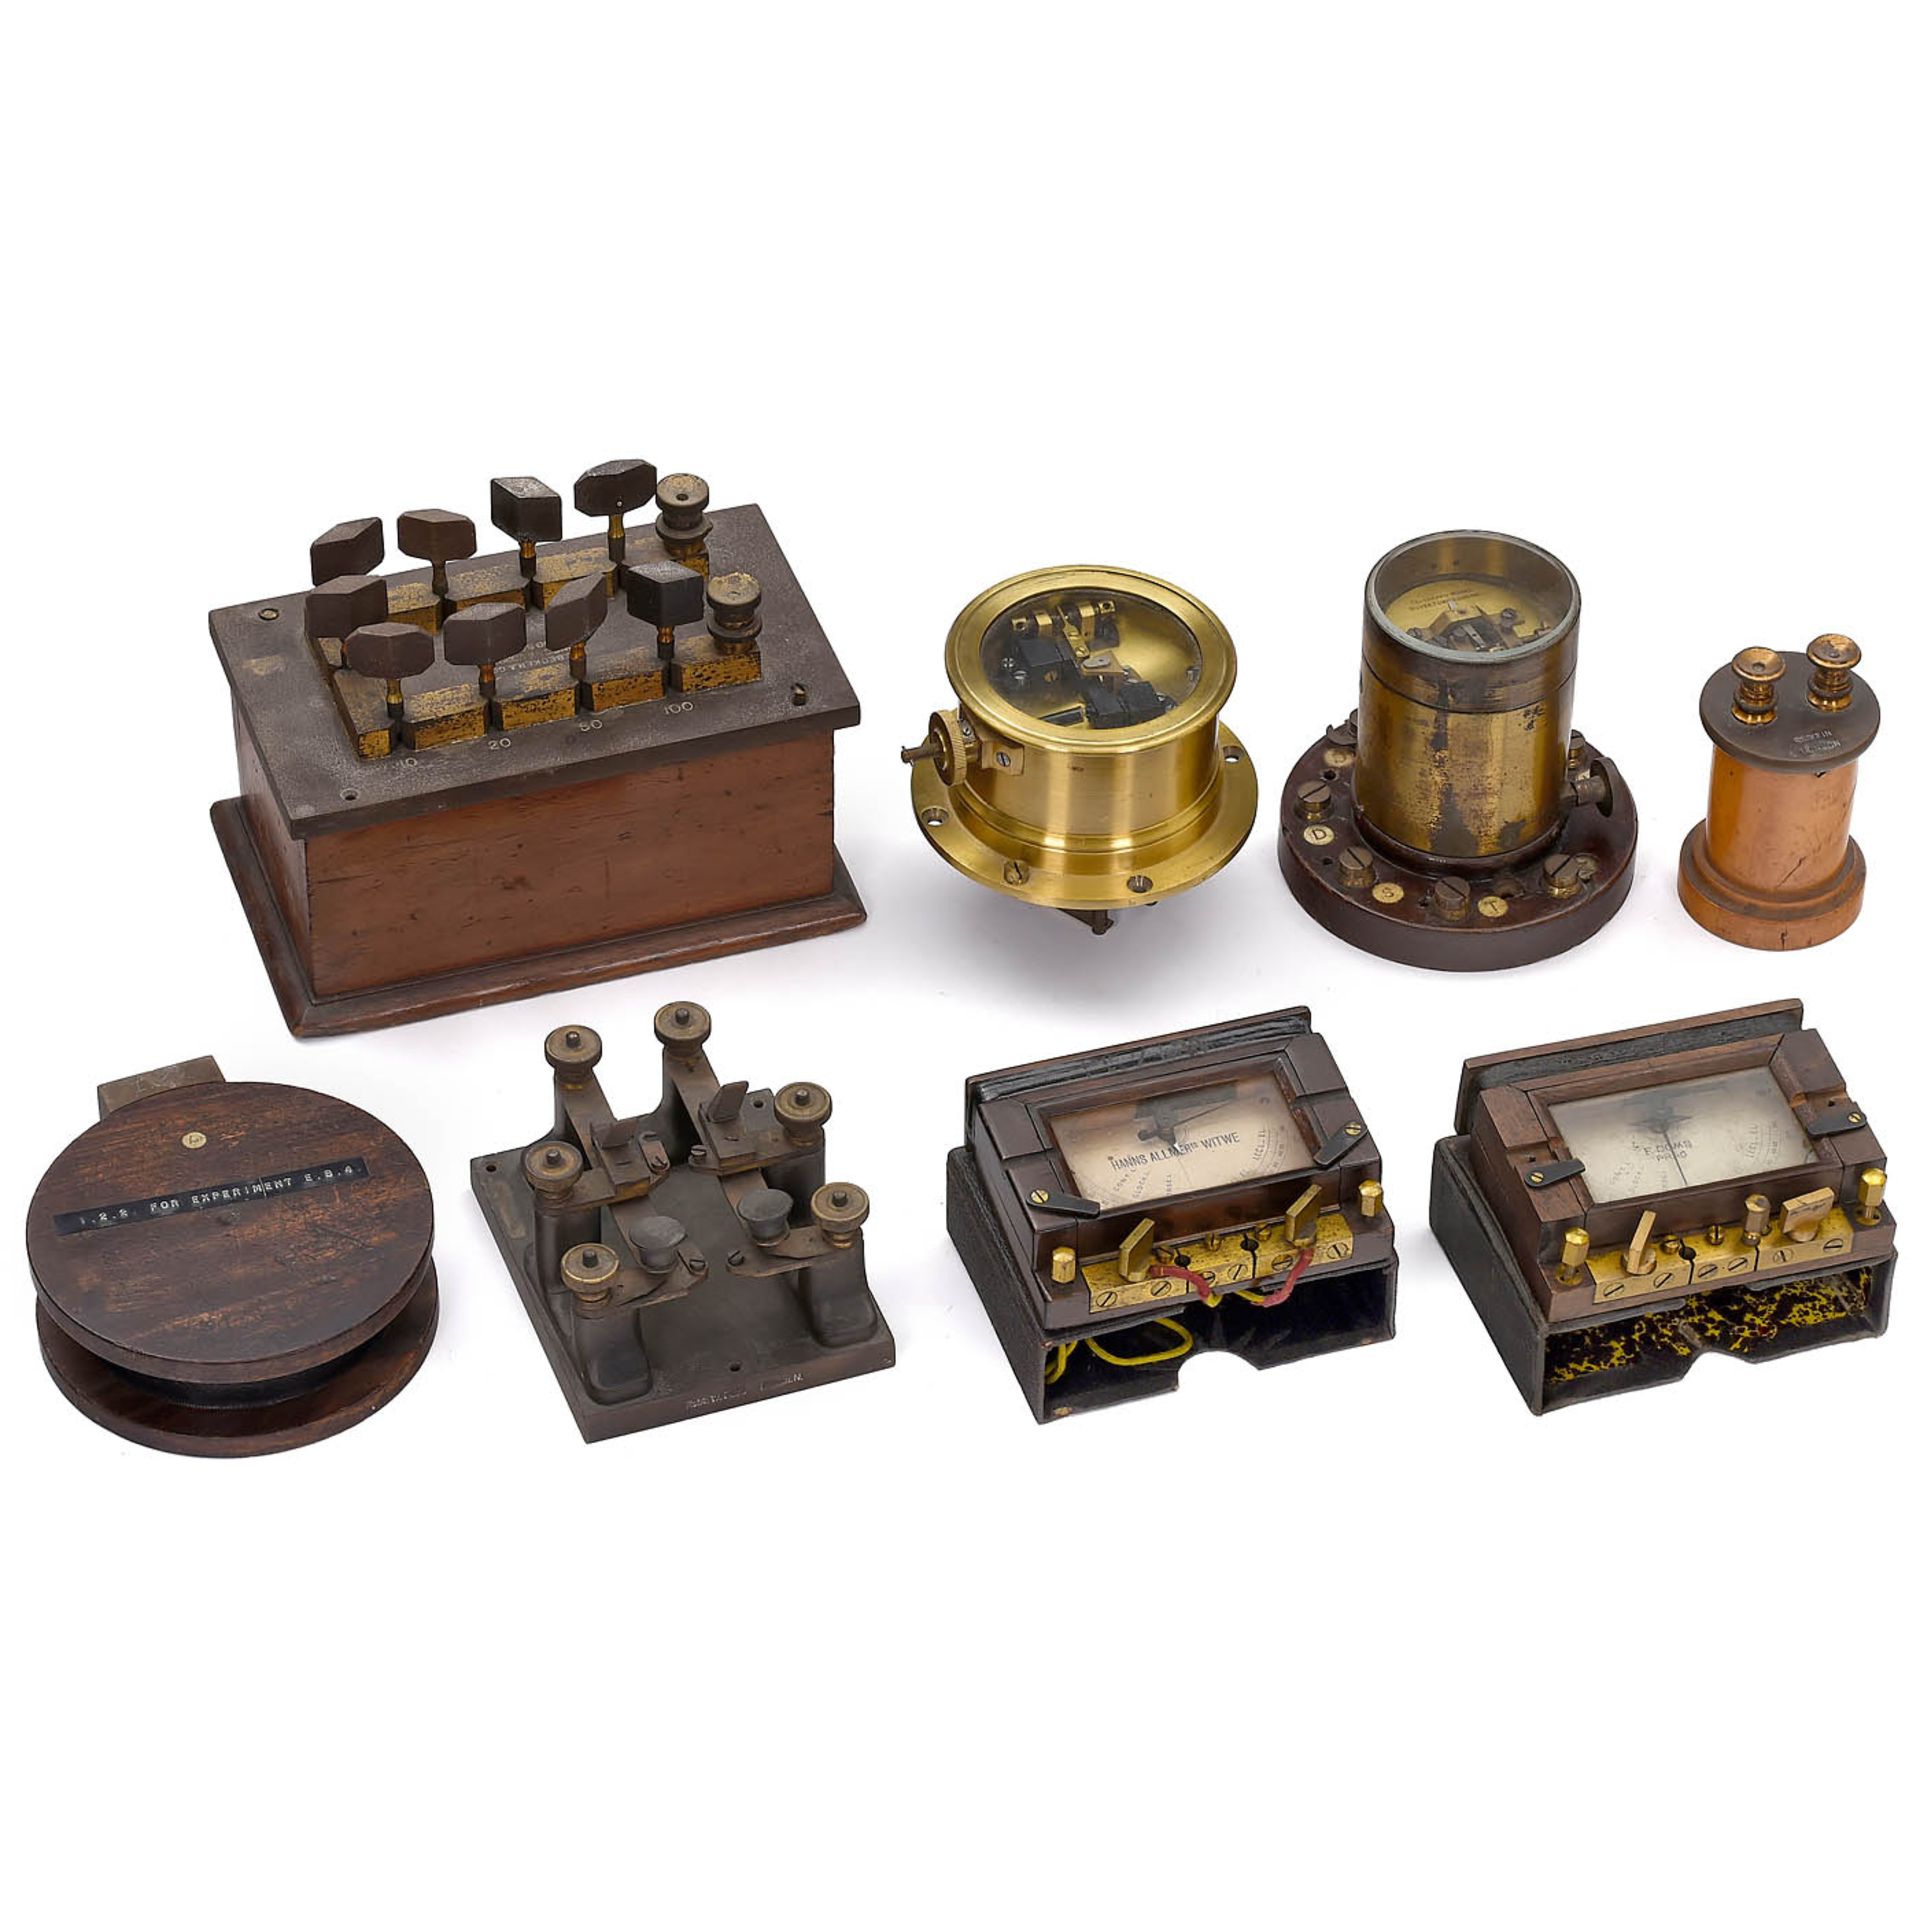 Collection of Technical Devices and Measuring Instruments, c. 1910 - Image 3 of 3